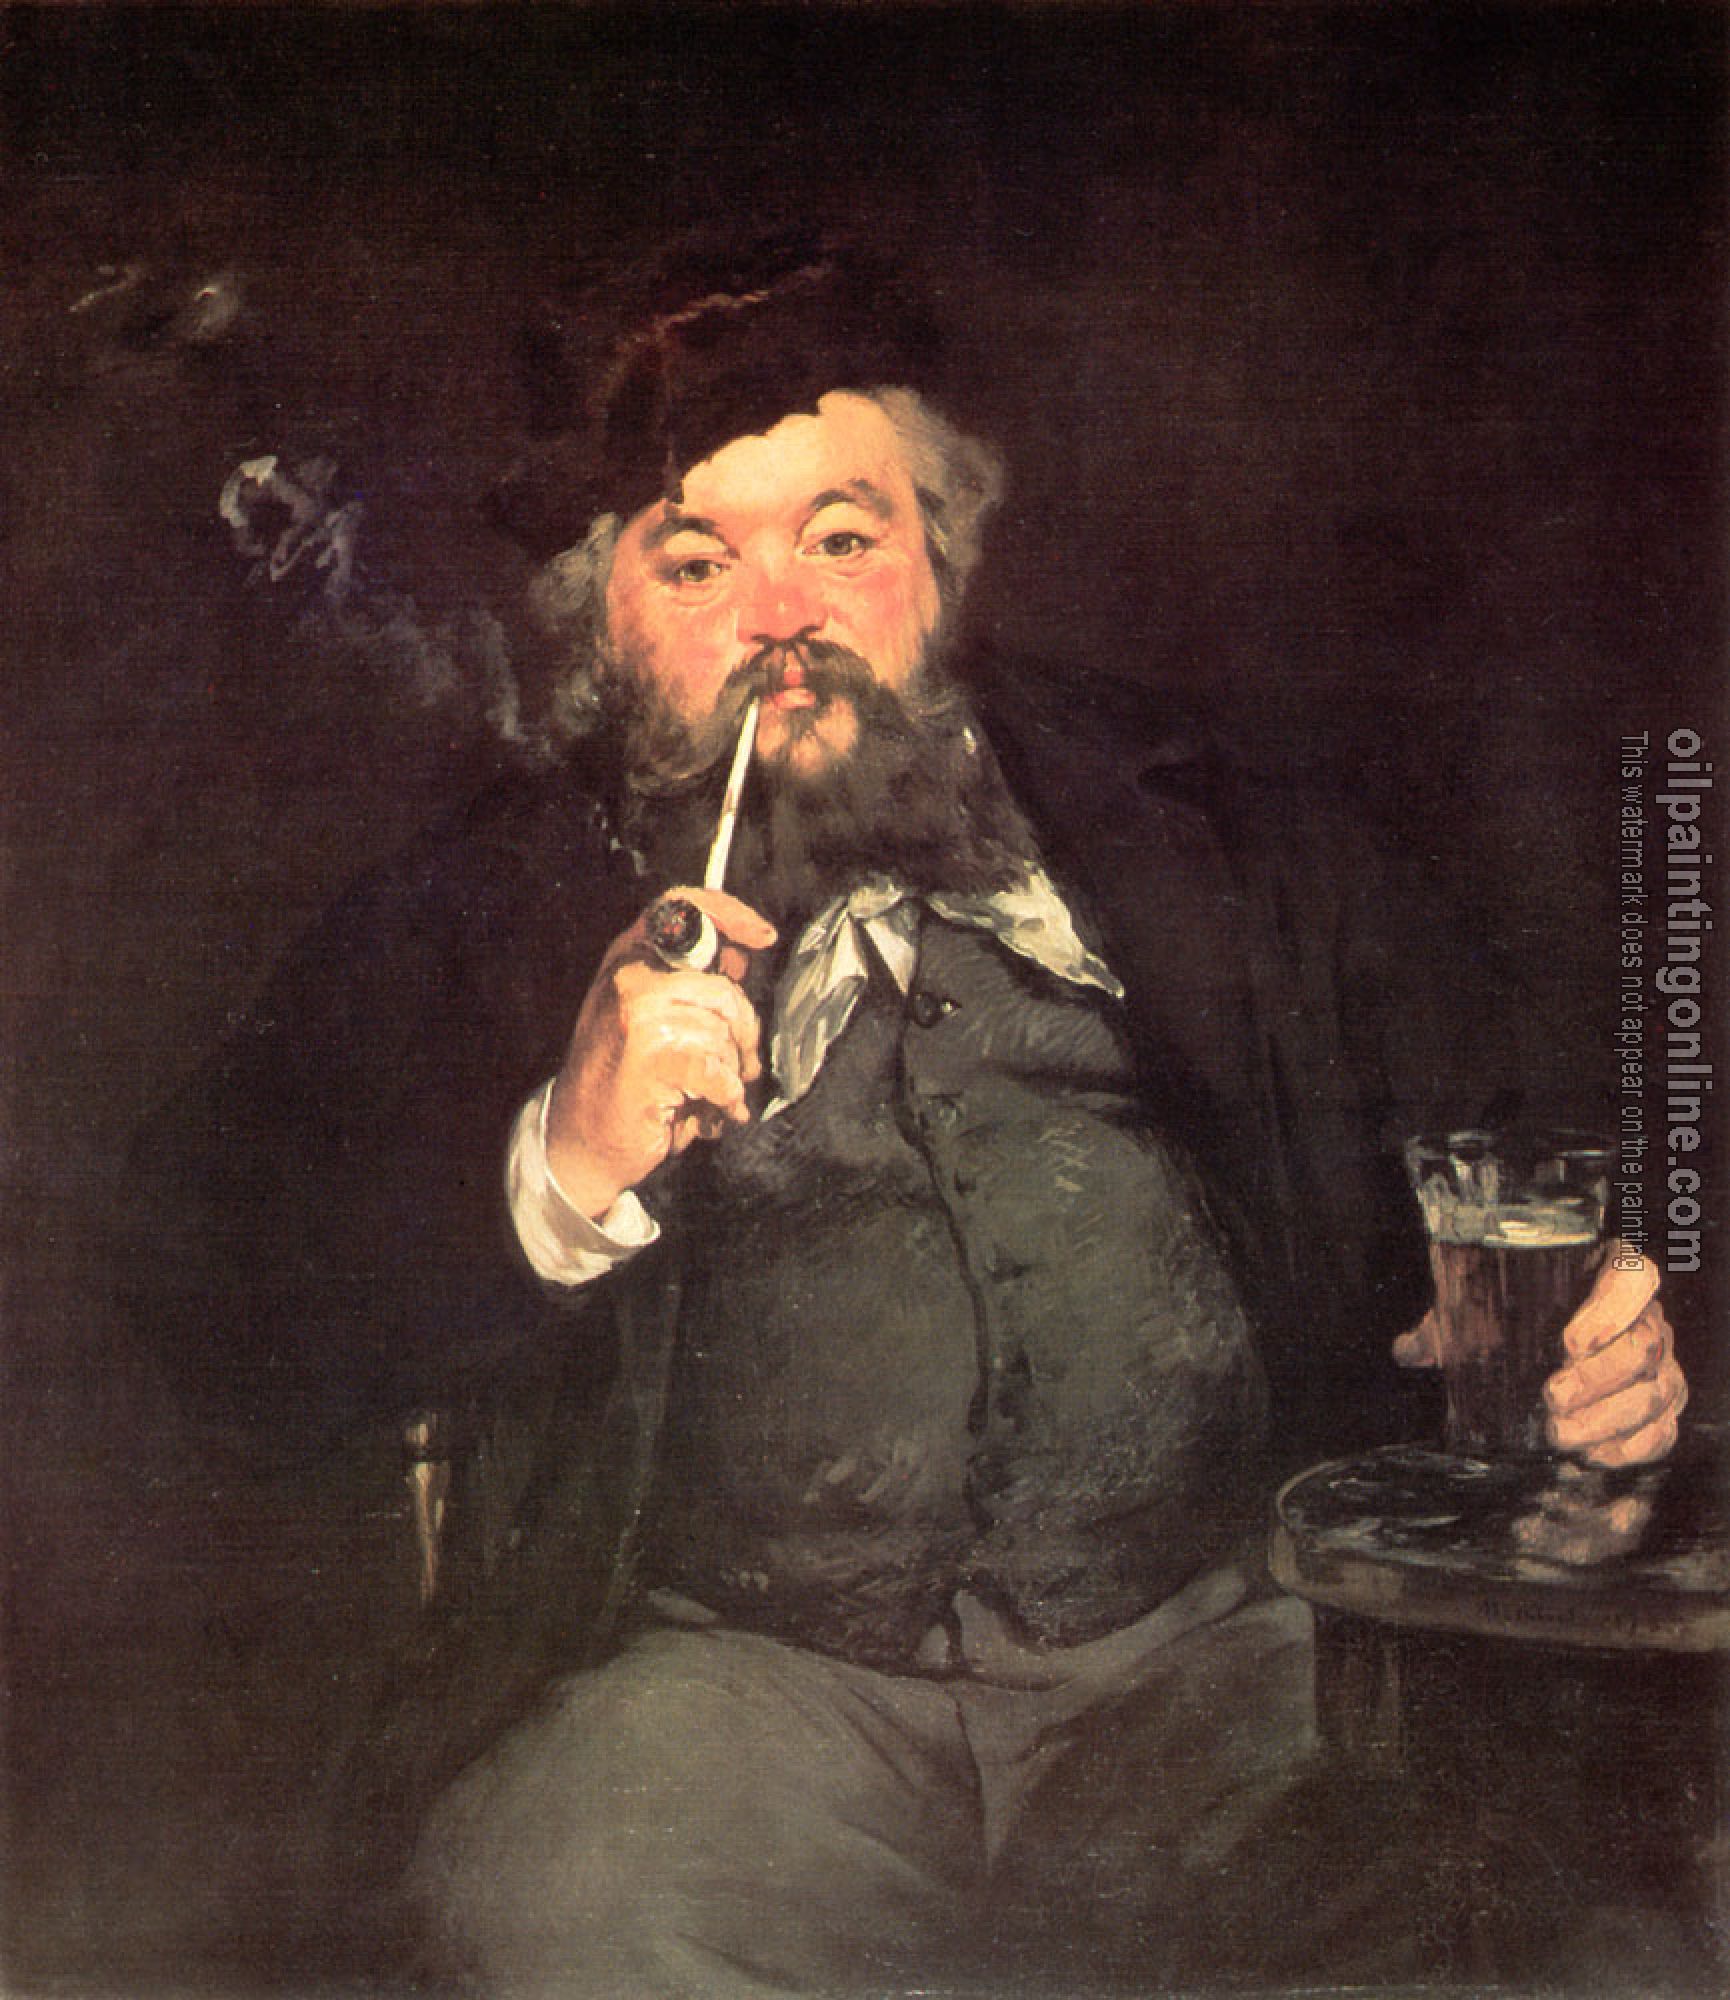 Manet, Edouard - Le Bon Bock(A Good Glass of Beer. , Study of Emile Bellot)